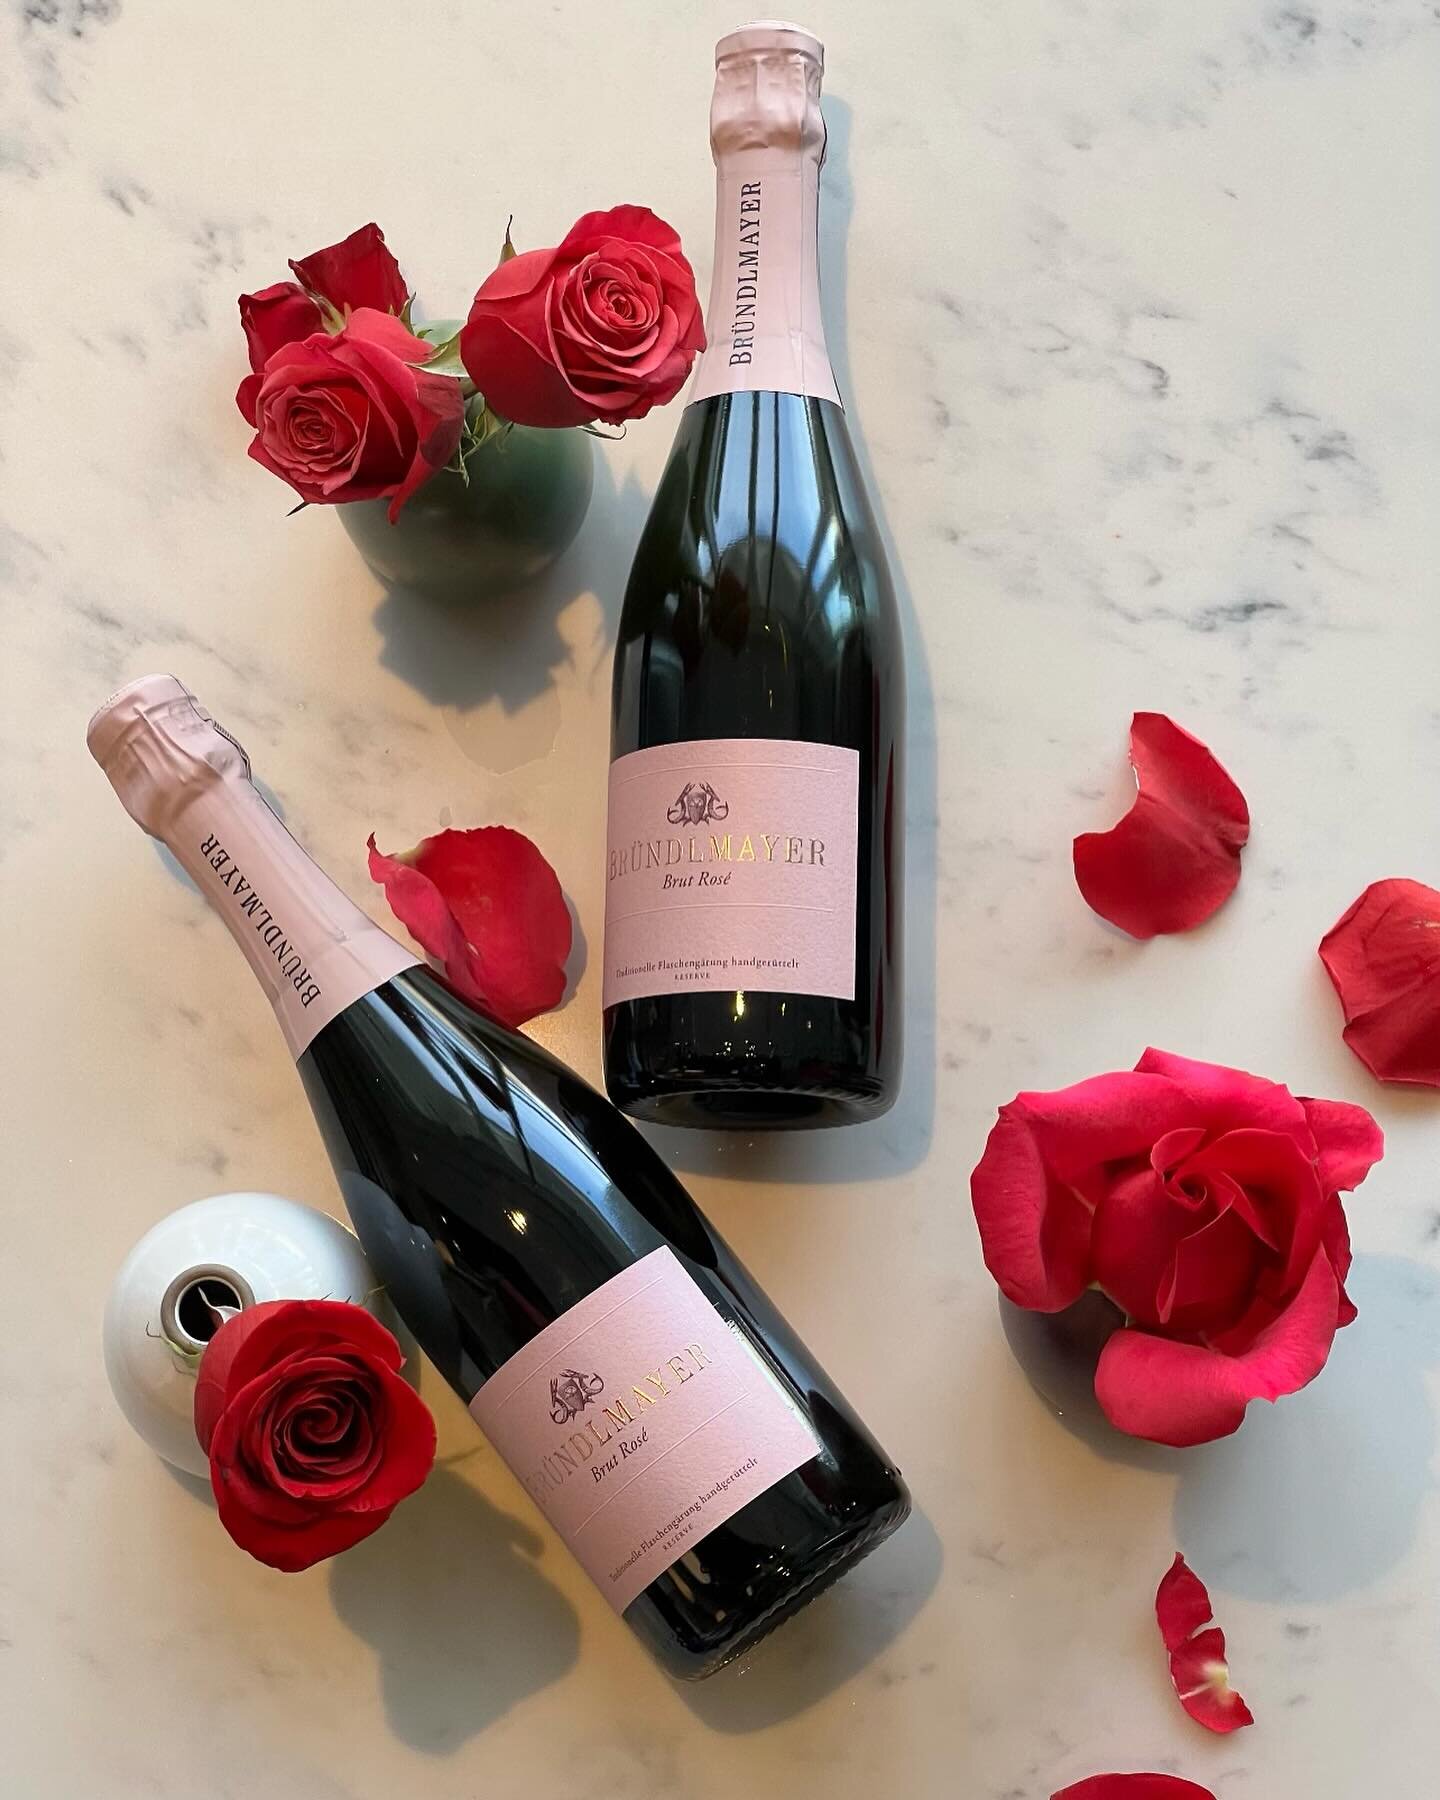 we ❤️ you

Here is a lovely picture of one of tonight&rsquo;s special pairings, selected and photographed by our beloved wine maven @rachel_krull 

Brundlmayer Brut Rose Kamptal, Austria